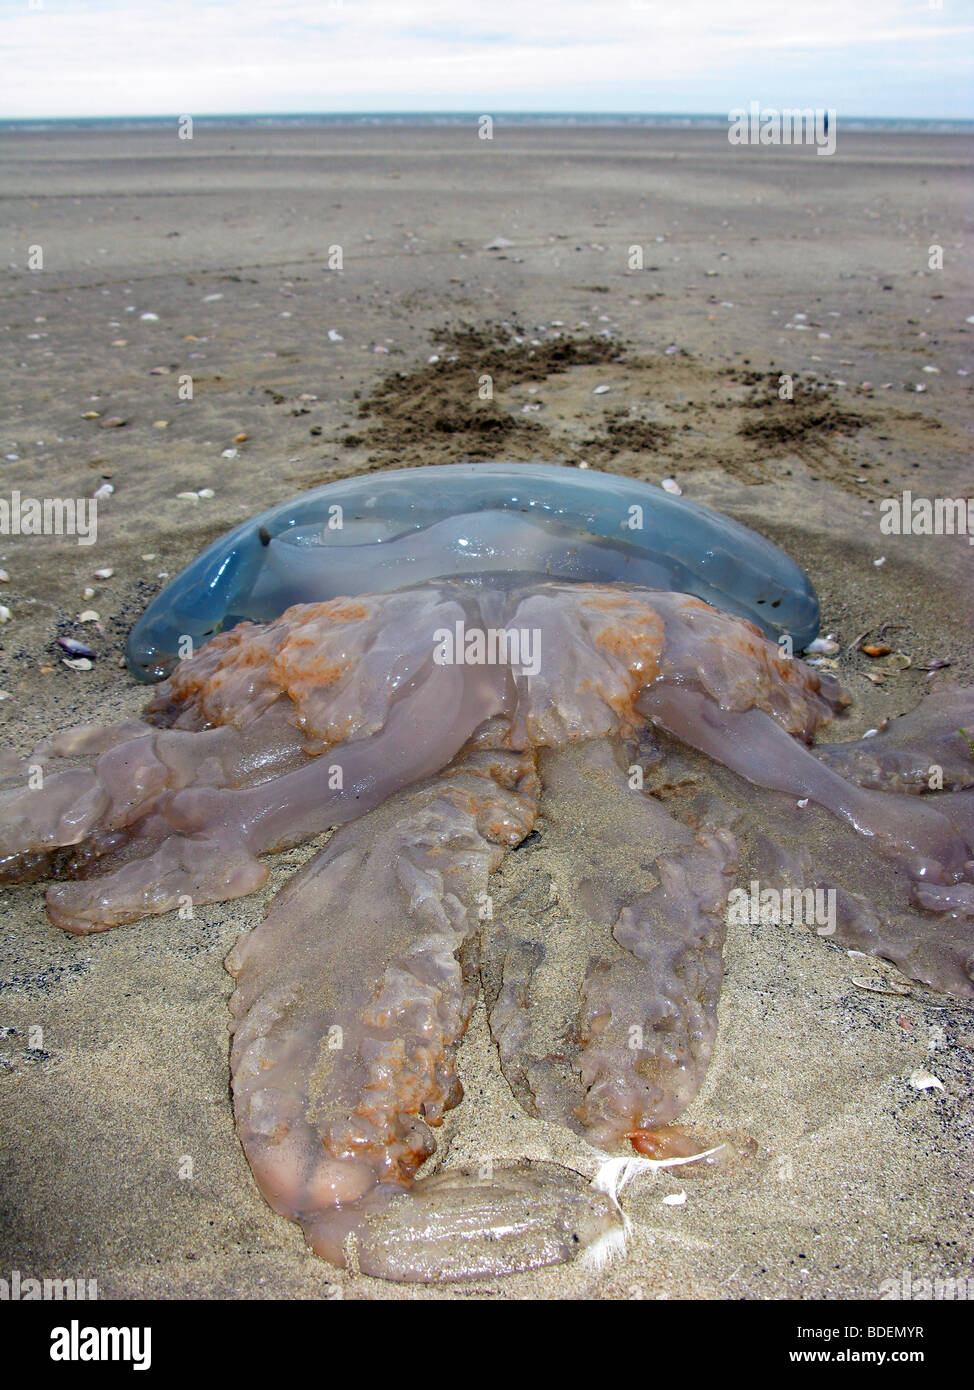 'Barrel Jellyfish' washed up on a beach Stock Photo